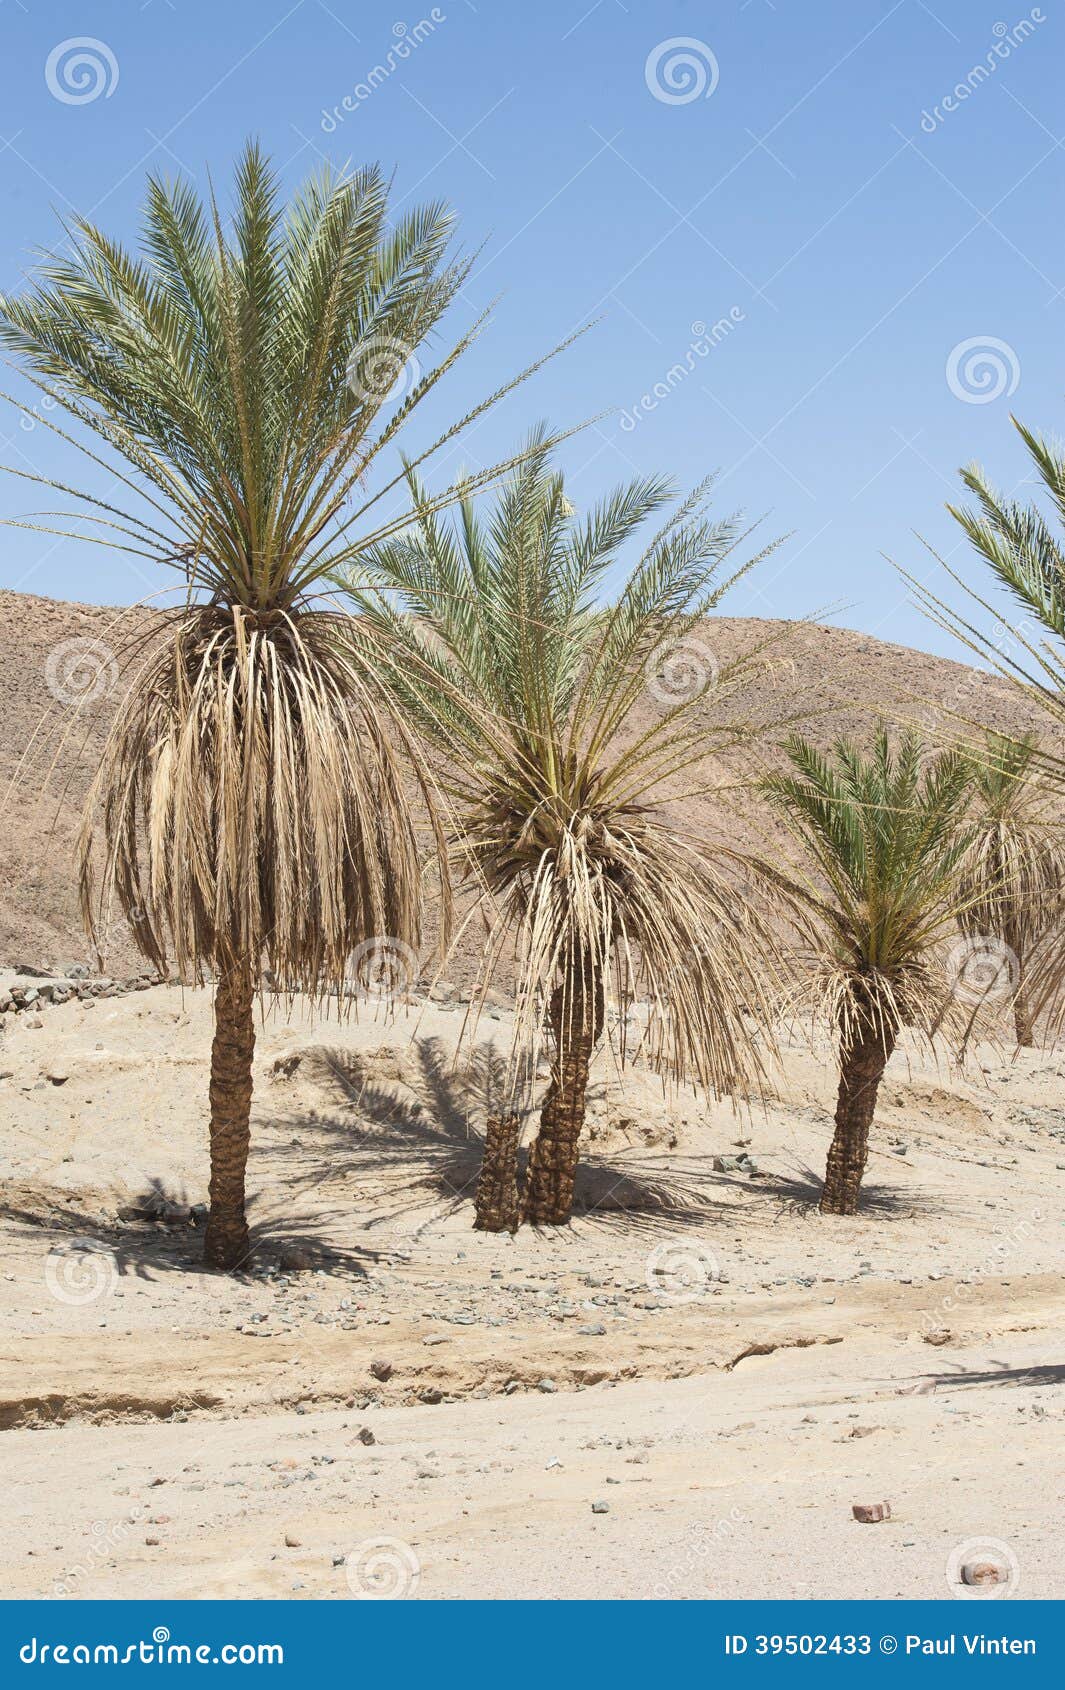 Date Palm Trees in a Desert Valley Stock Image  Image of leaf, blue